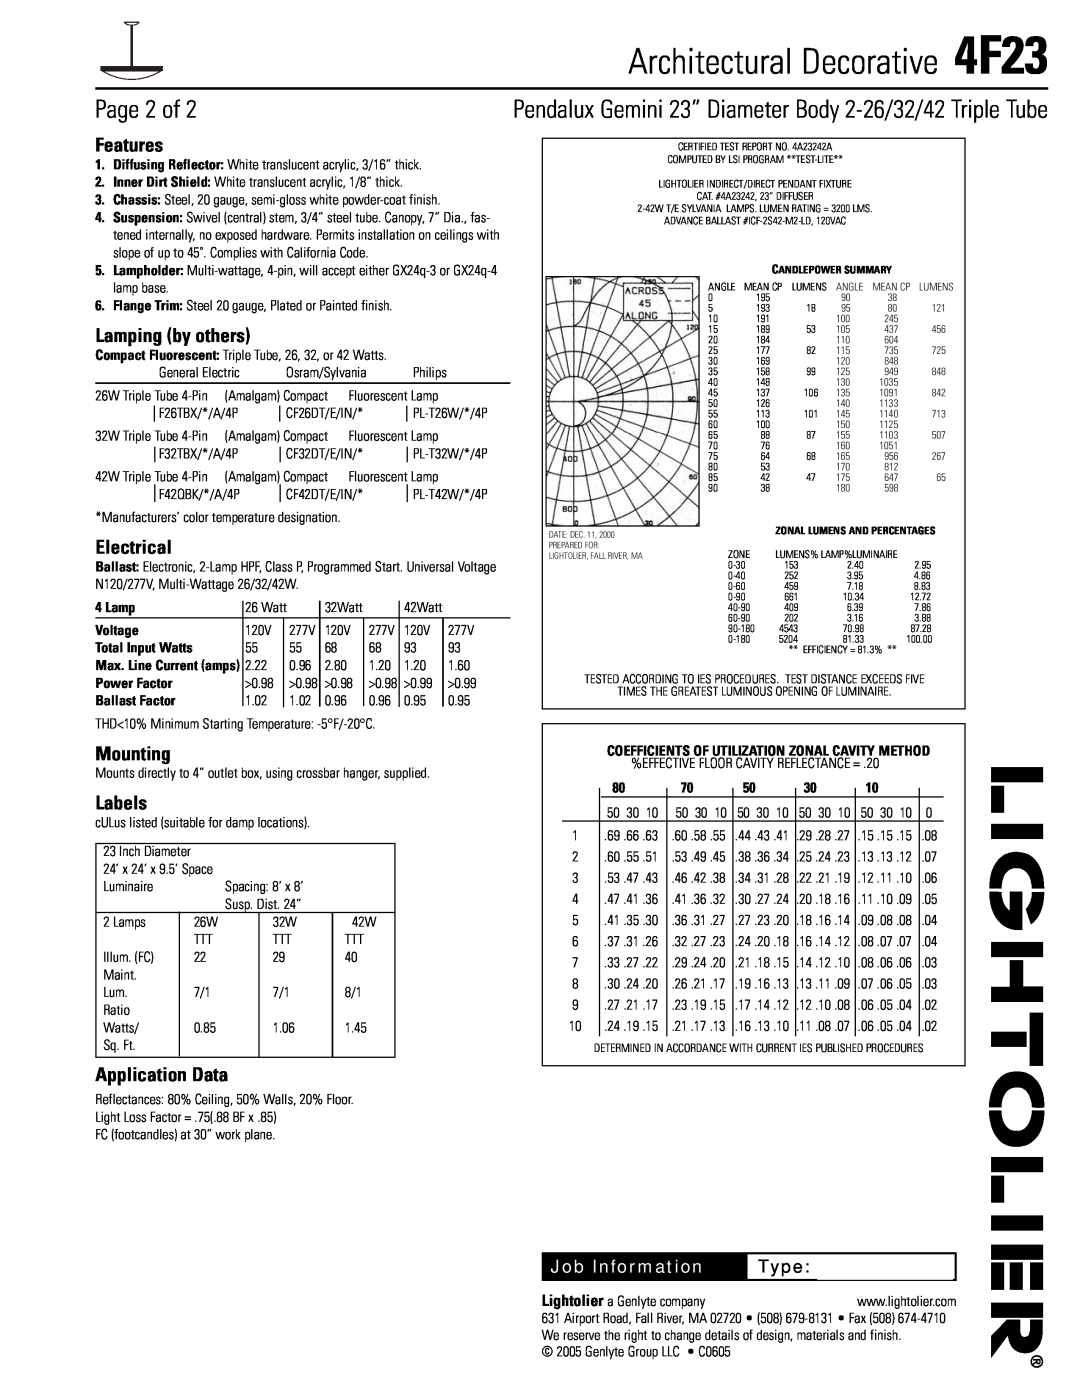 Lightolier 4F23 specifications Page 2 of, Features, Lamping by others, Electrical, Mounting, Labels, Application Data, Type 